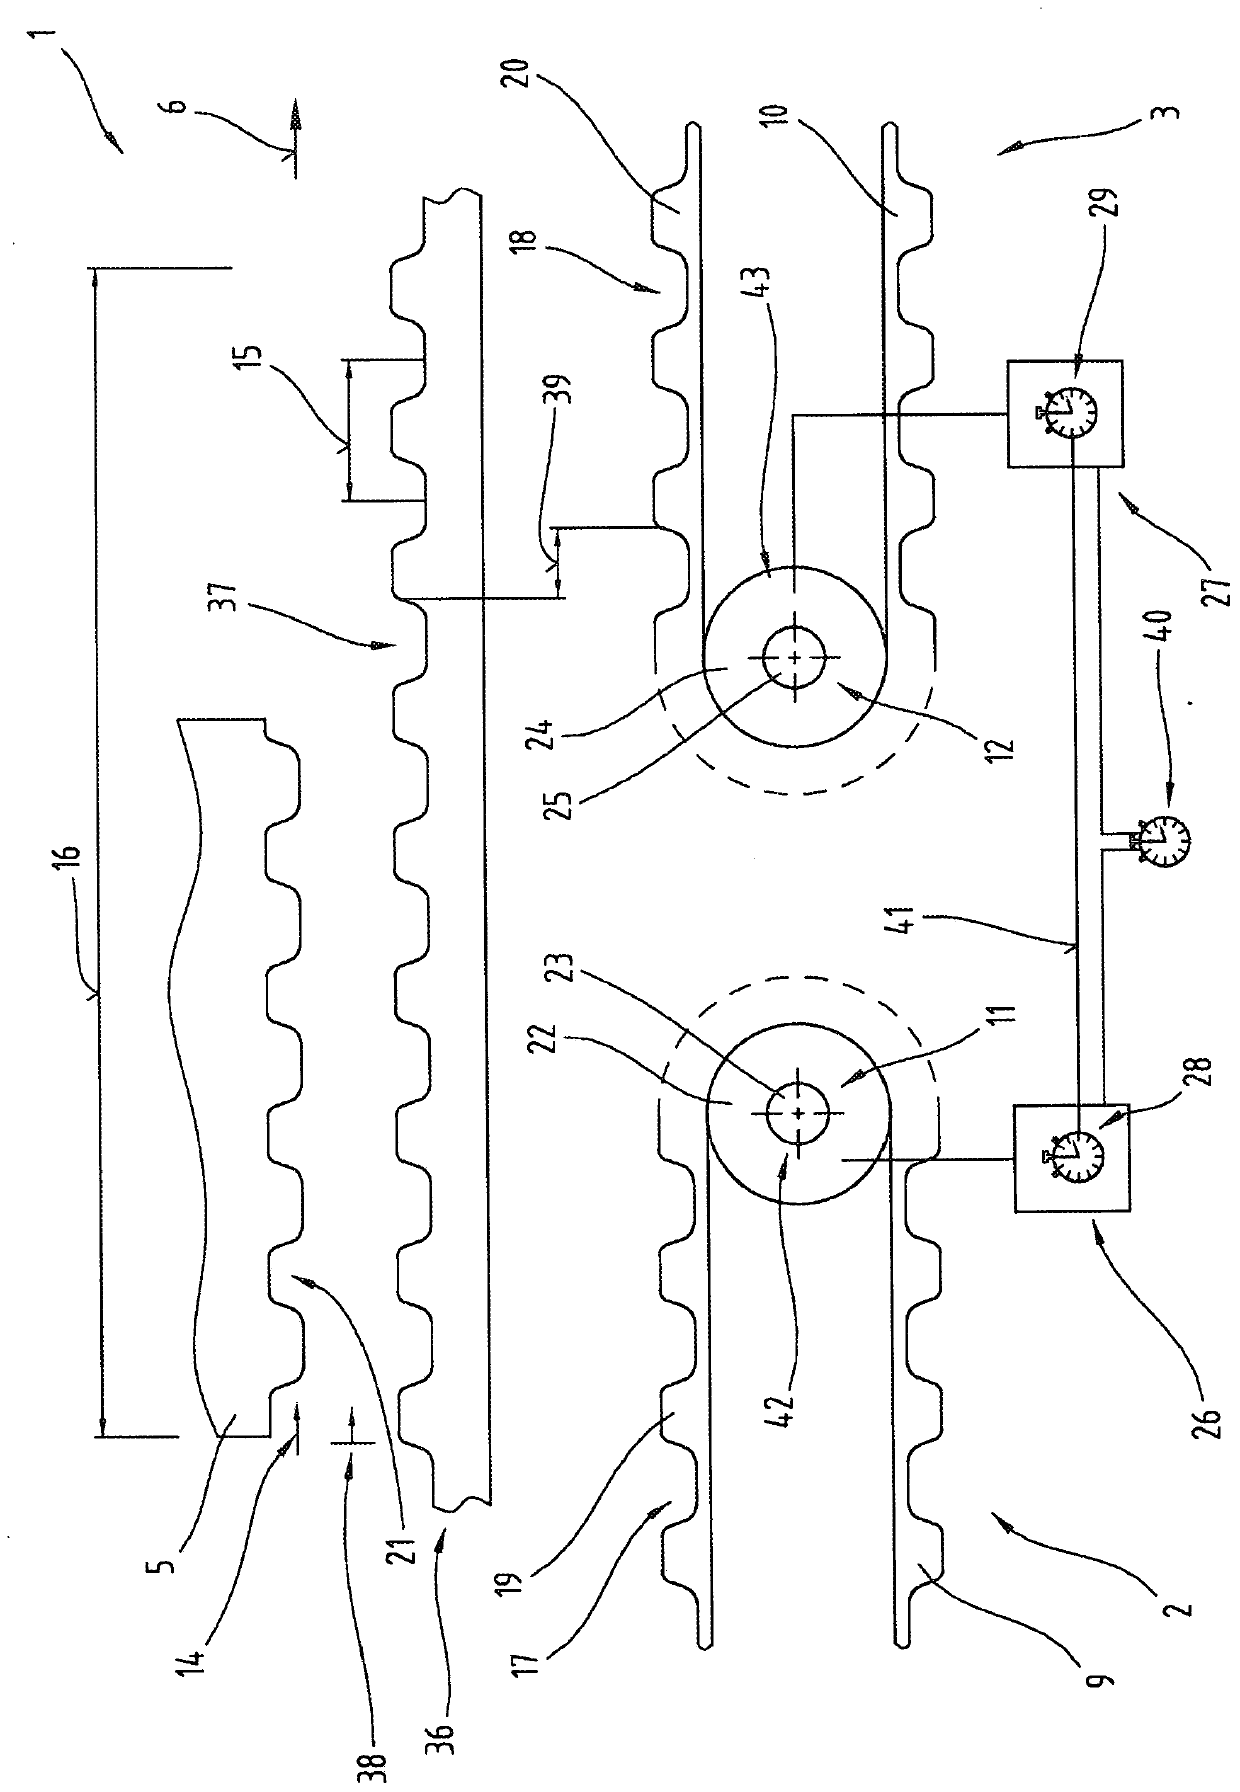 Method for transferring a workpiece support between two toothed belt conveyors